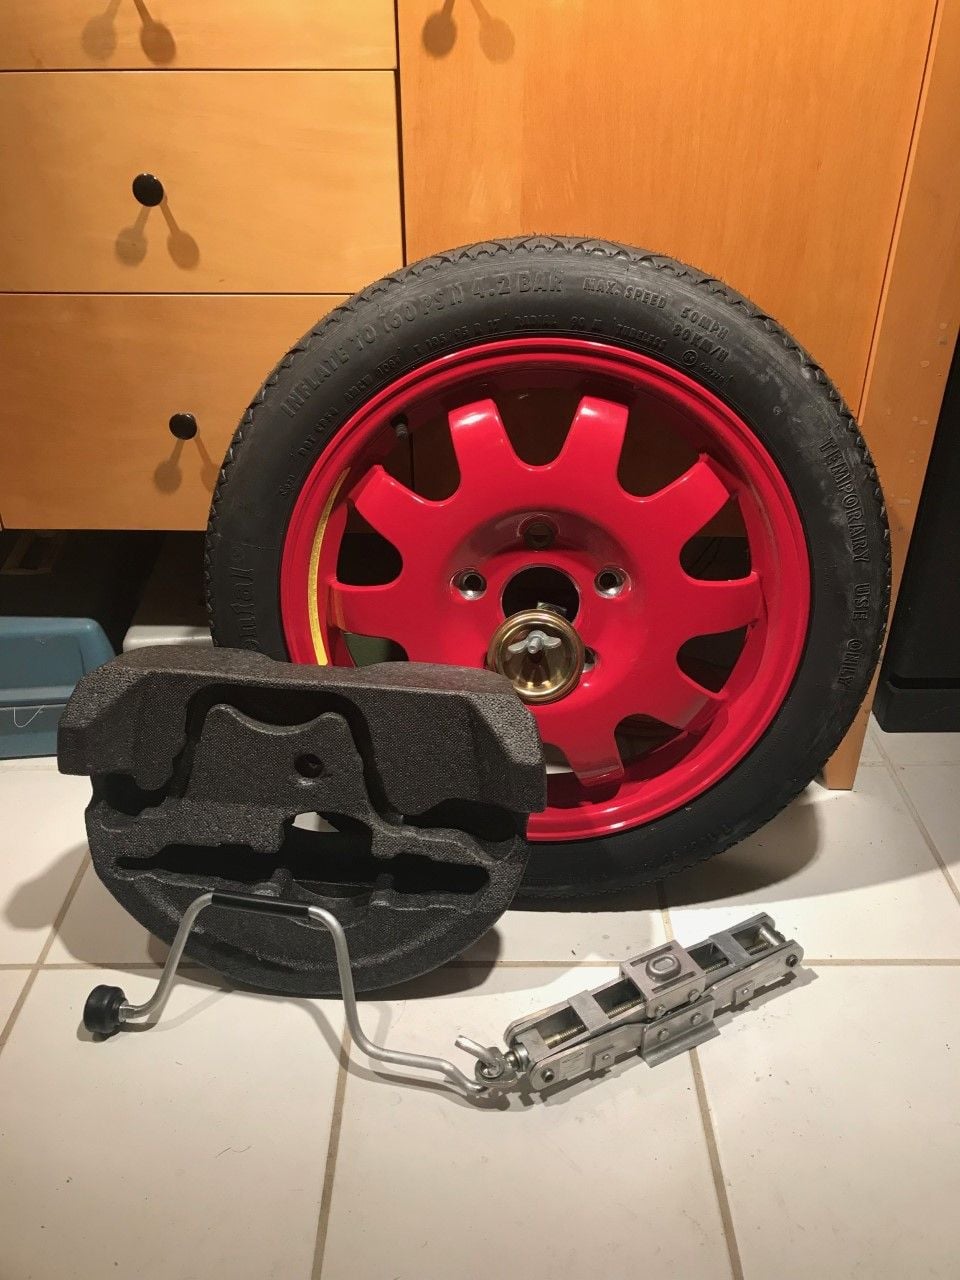 2000 Porsche 911 - Complete Spare and Jack Kit - Miscellaneous - $250 - Plainview, NY 11803, United States